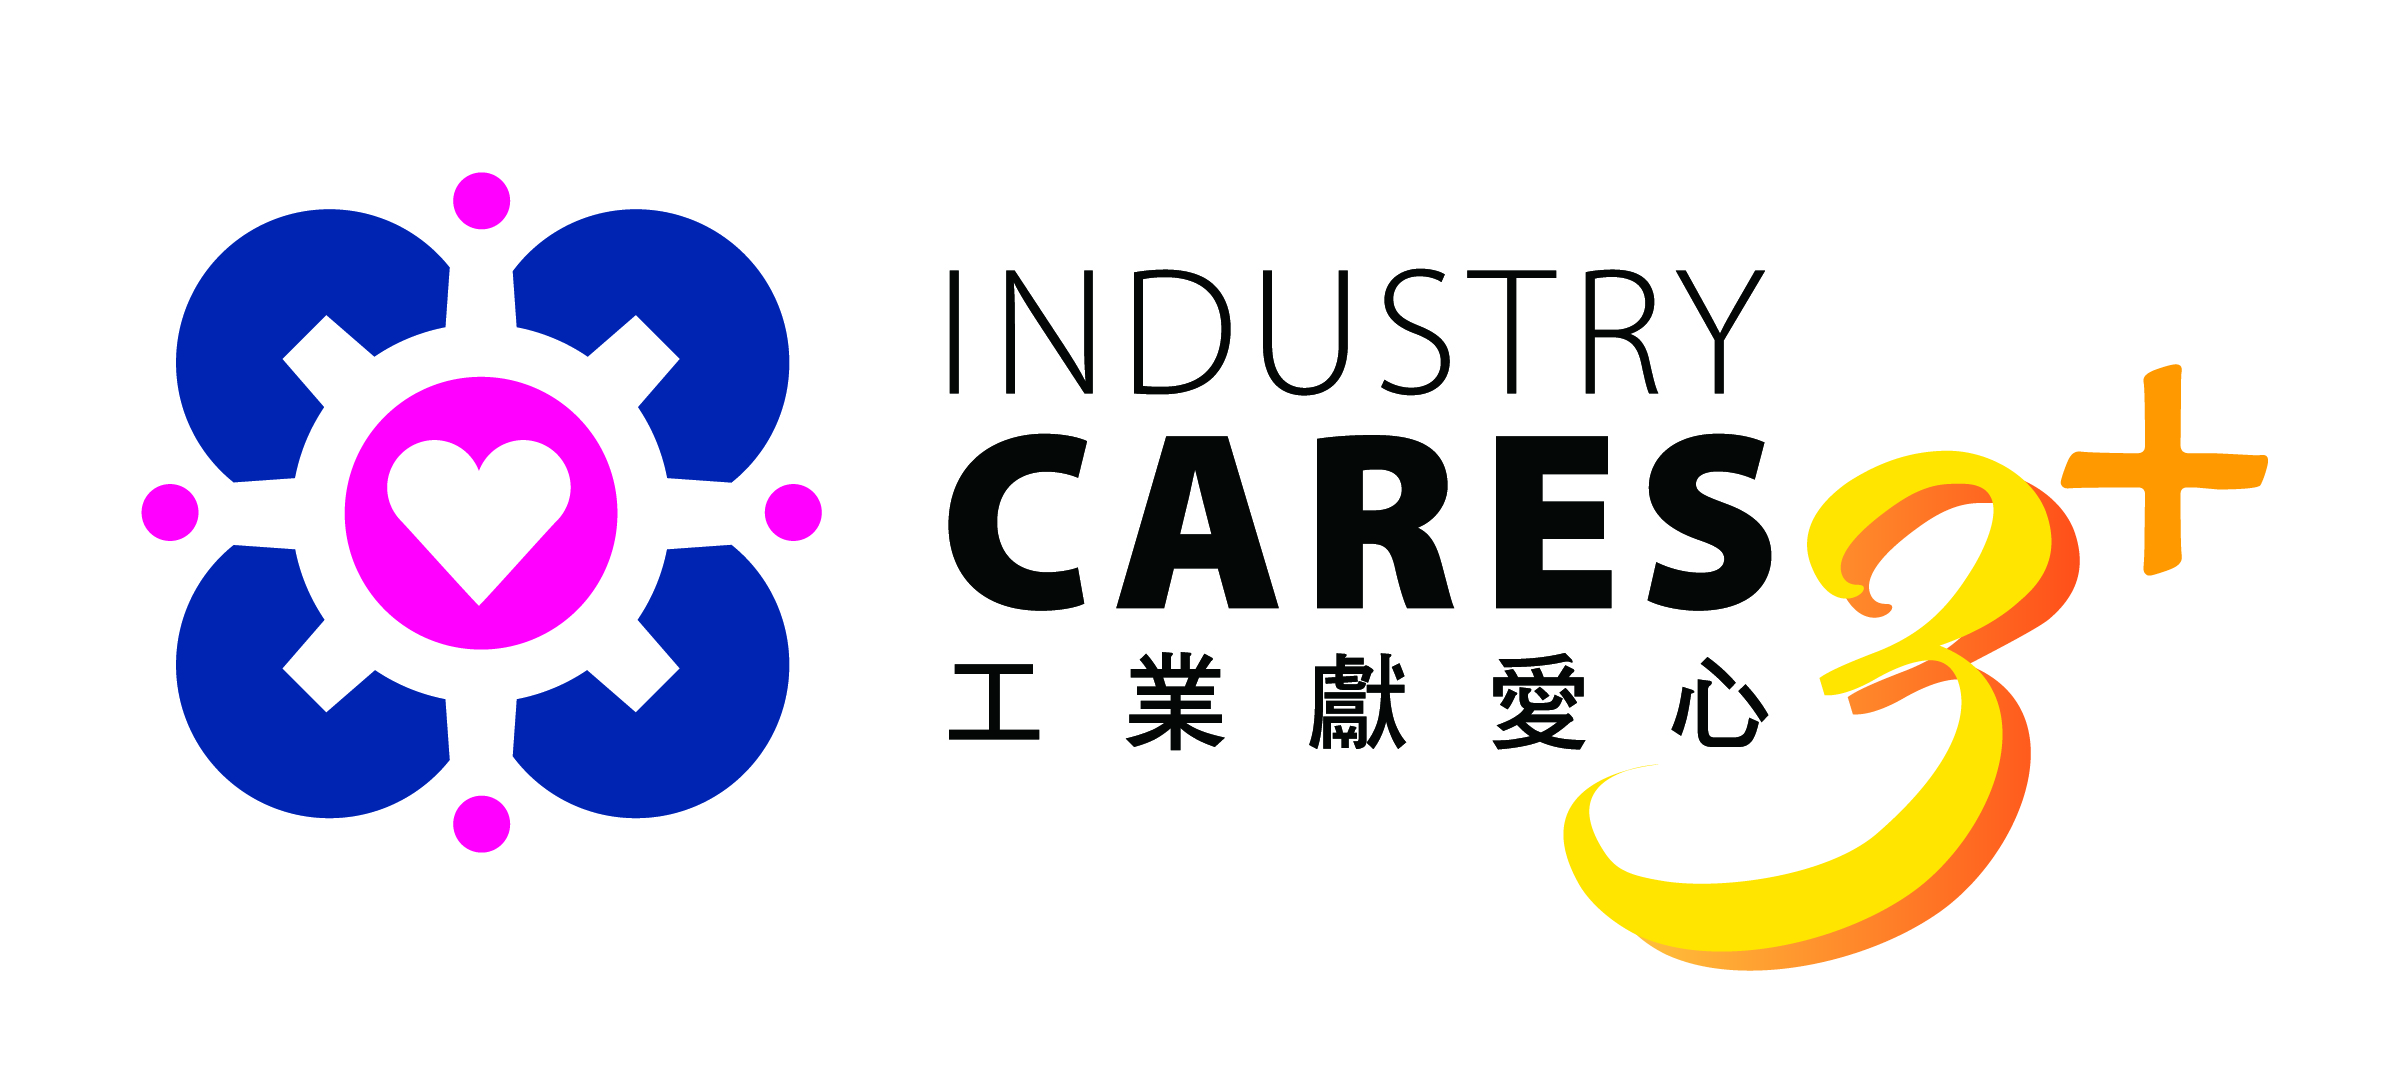 D&G Technology was honored the 3+ Year Award of Industry Cares 2019